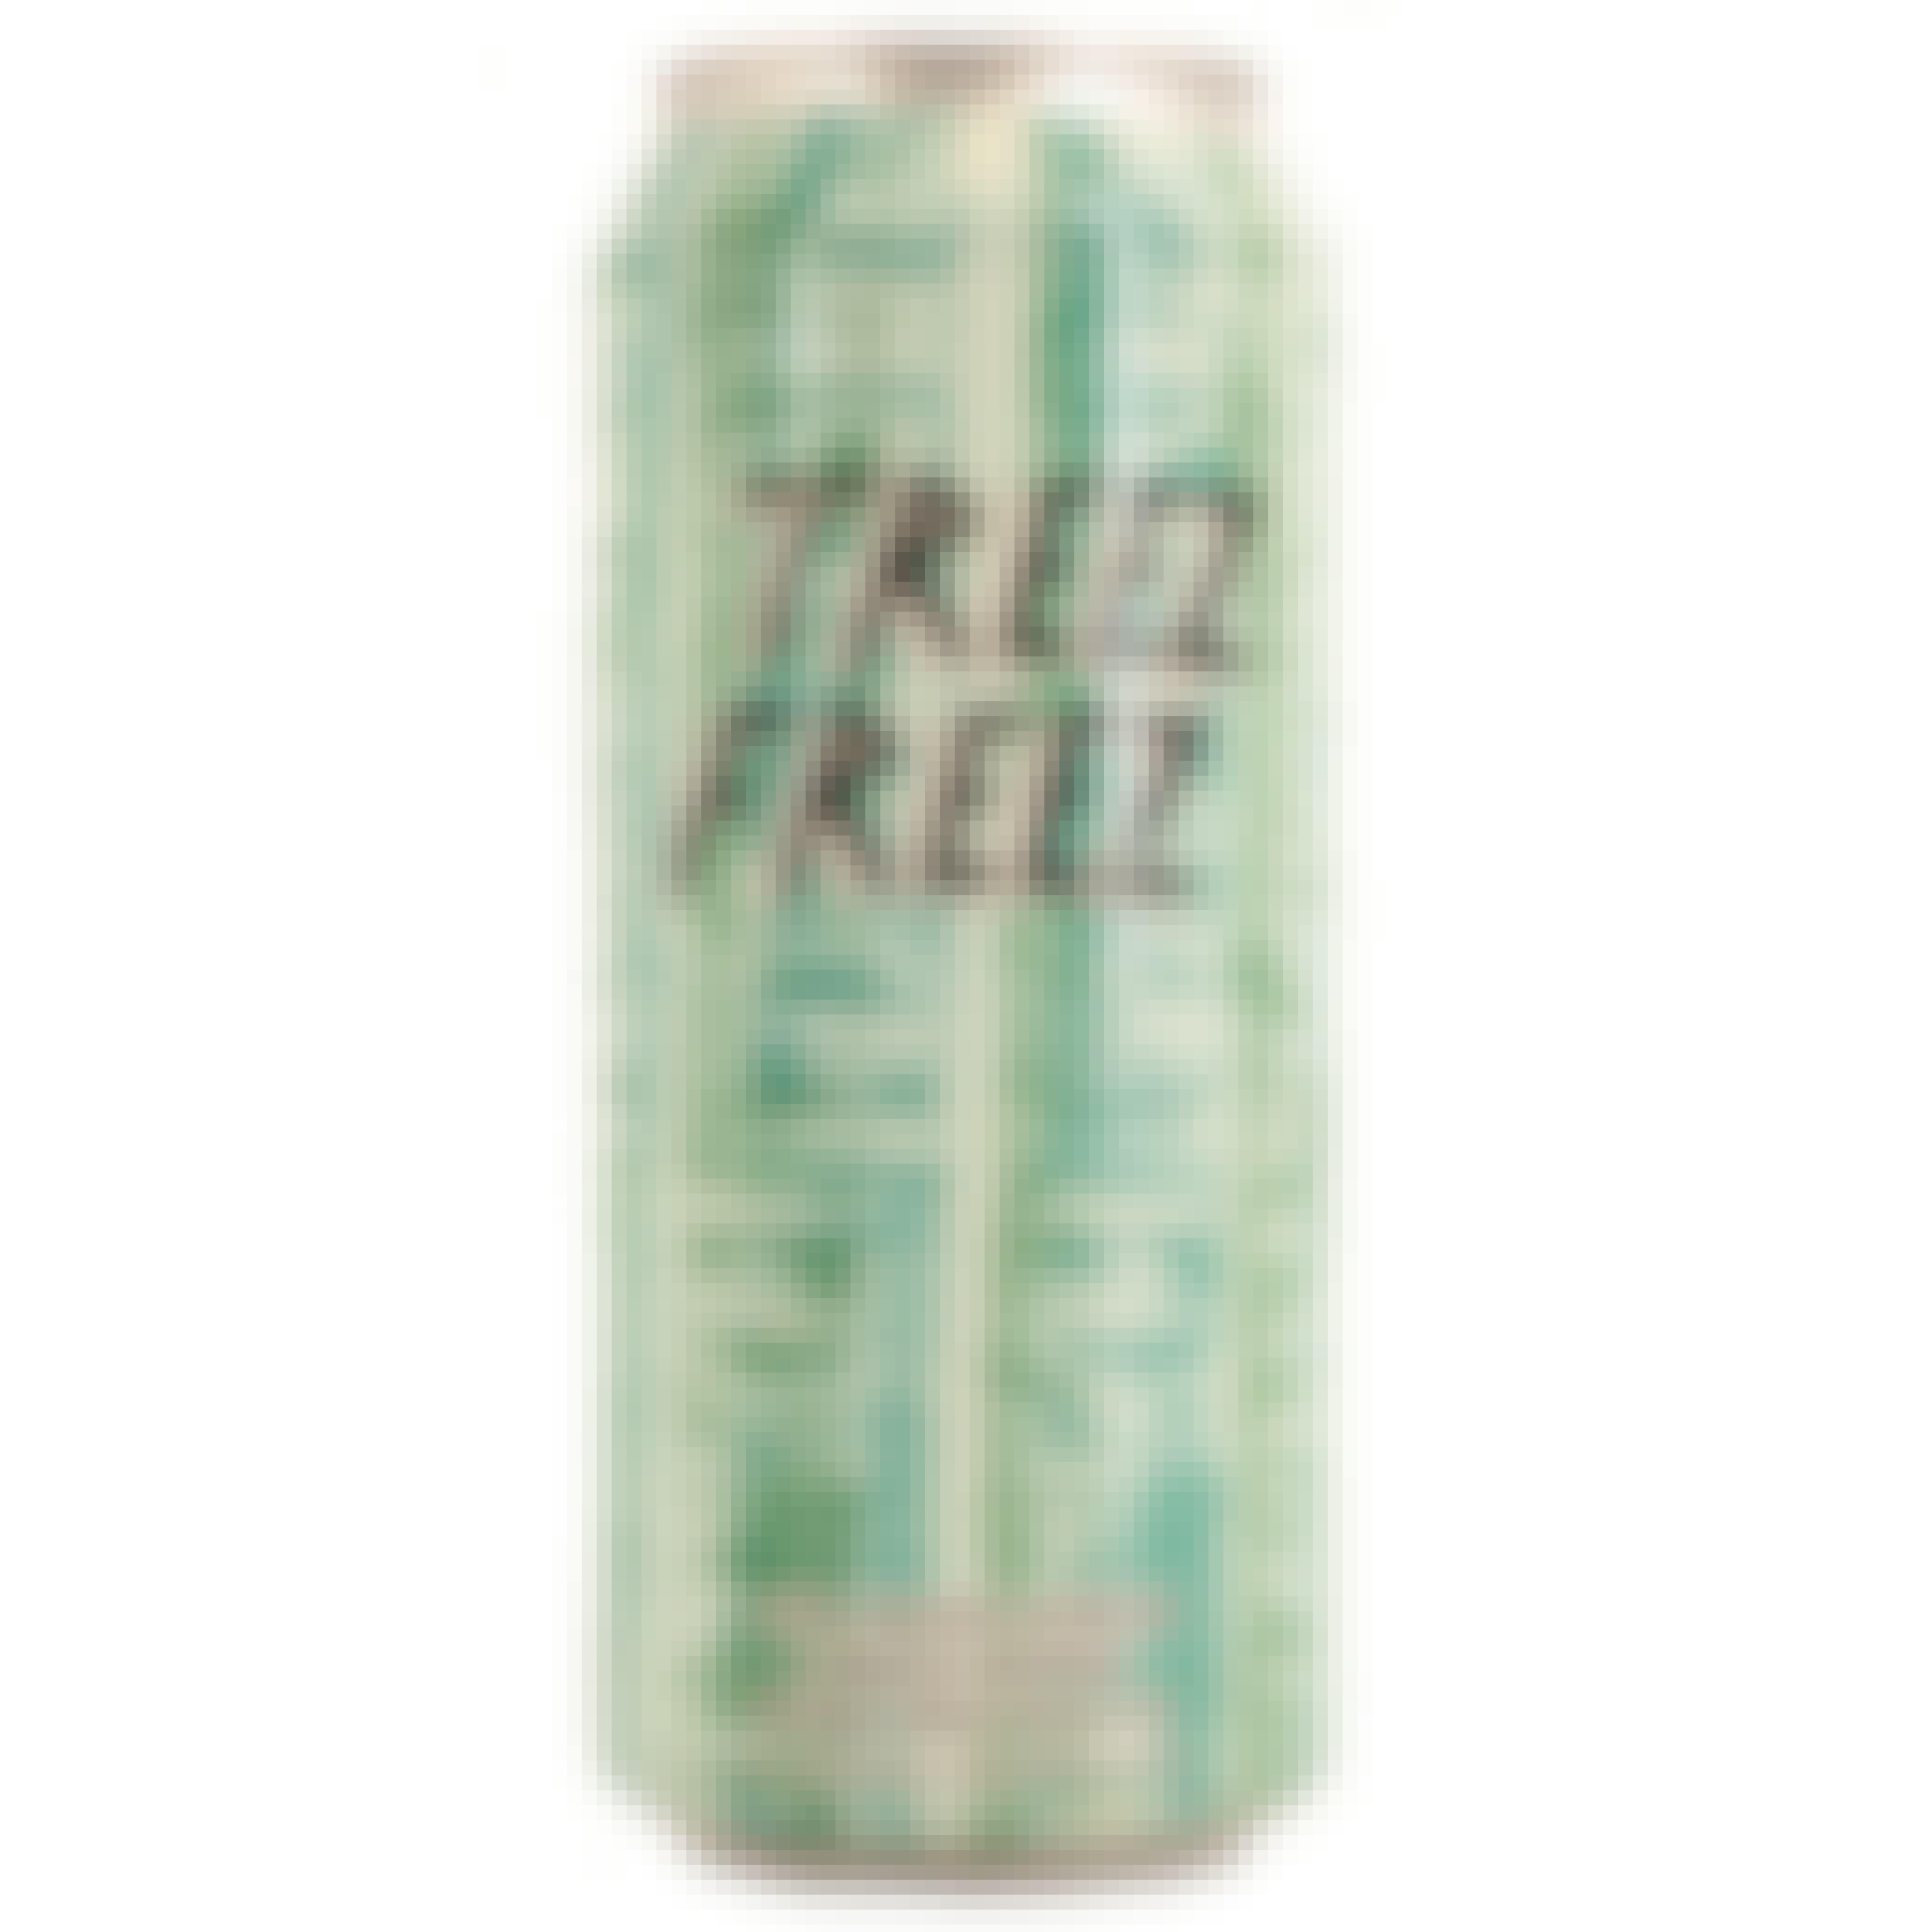 Hop Butcher For The World Treez Freez 4 pack 16 oz. Can